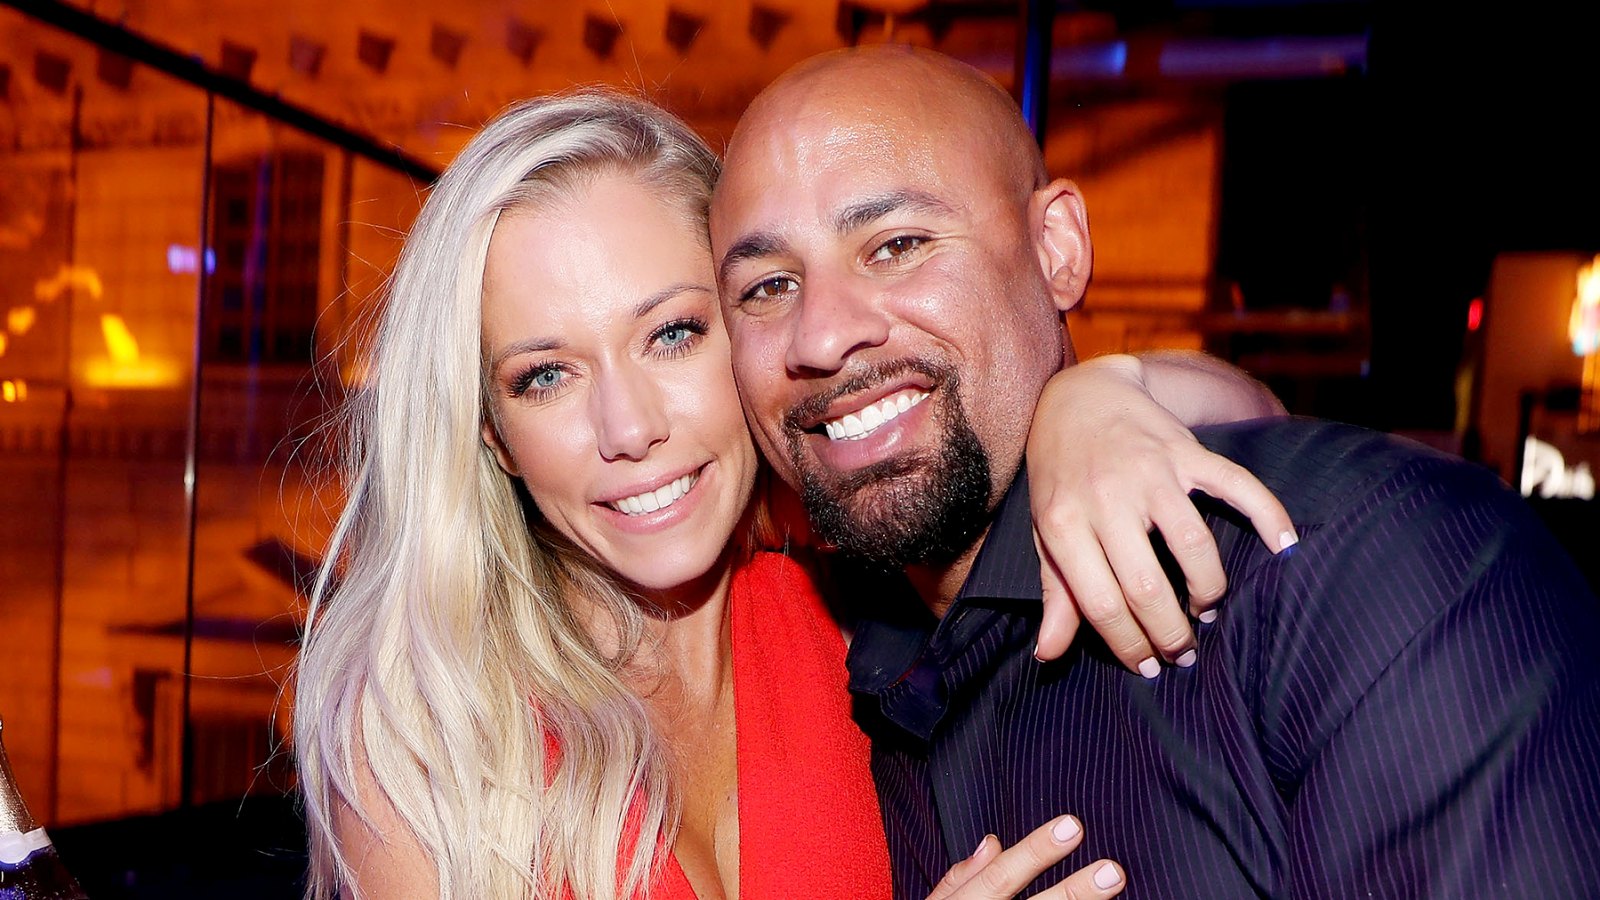 Kendra Wilkinson and Hank Baskett celebrates Wilkinson's birthday during the premiere celebration for WE tv's "Kendra on Top" and "Sex Tips for Straight Women from a Gay Man" on June 8, 2017 in Las Vegas, Nevada.